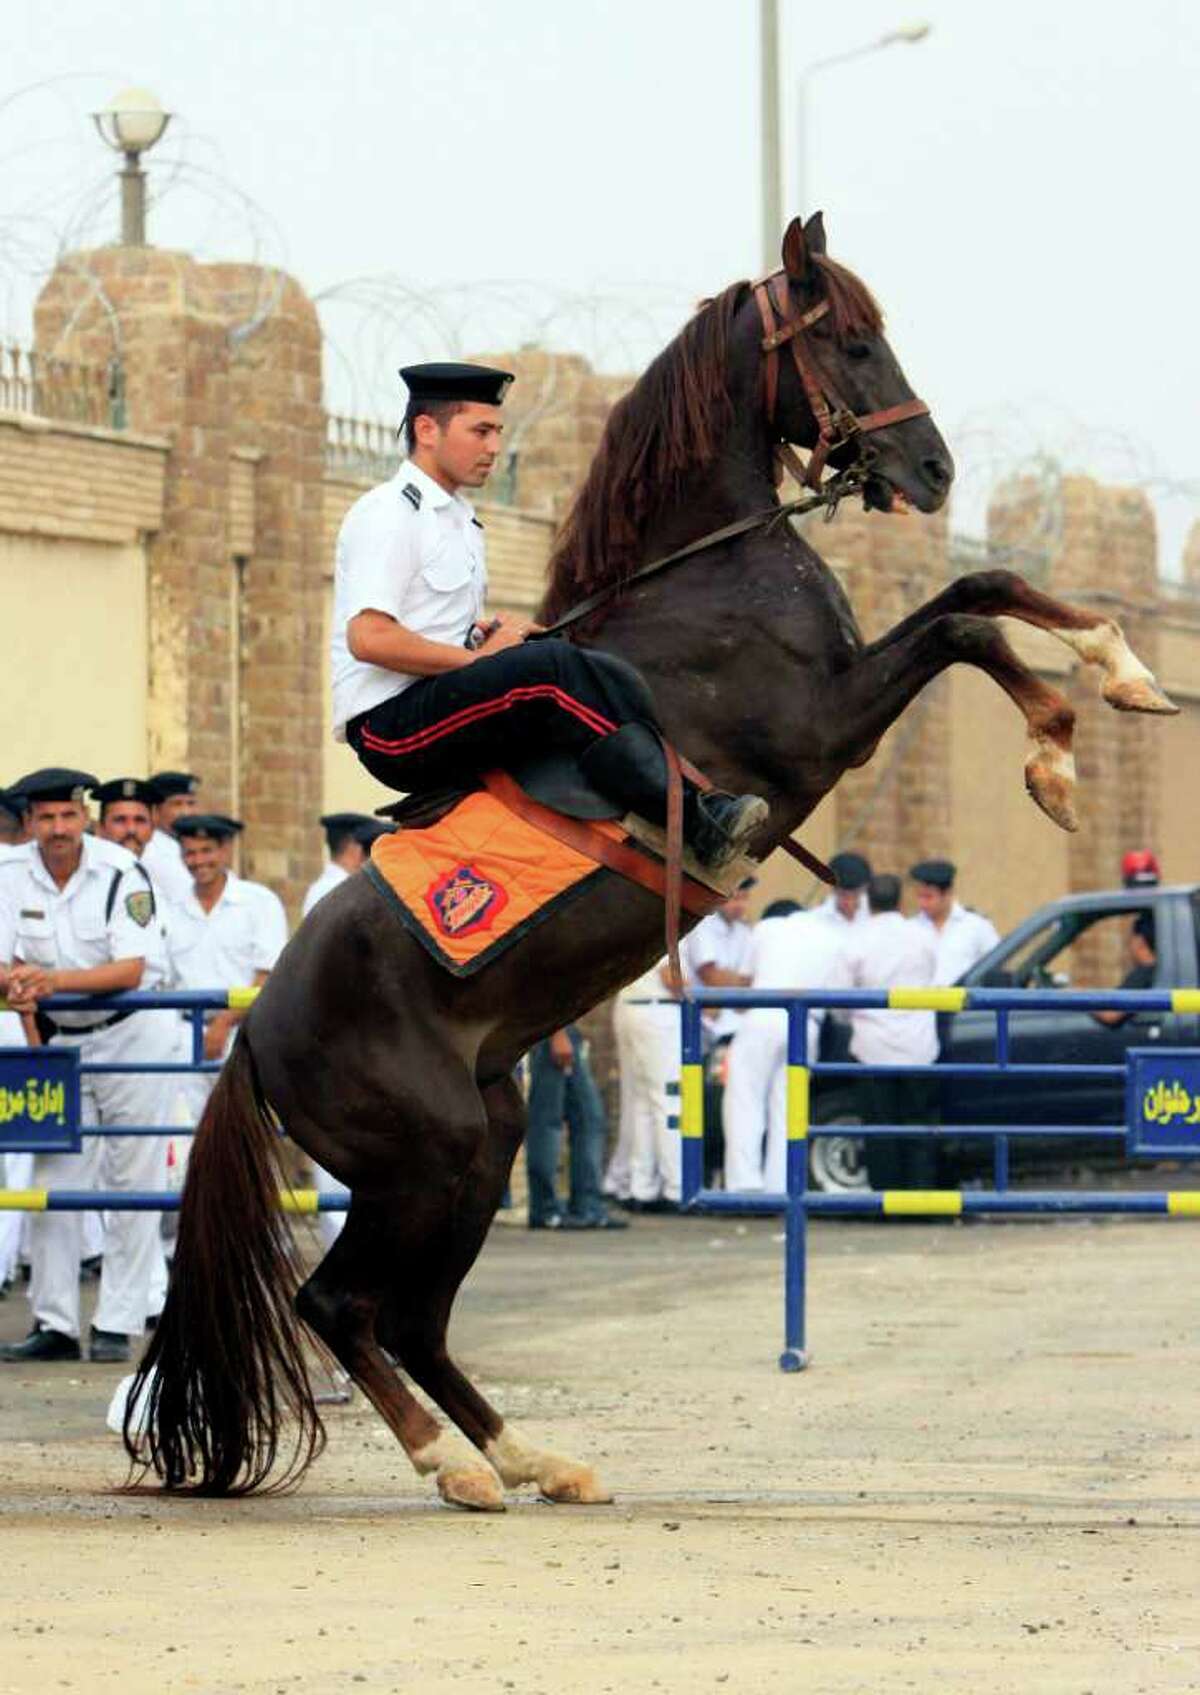 A horse stands on his back legs as an Egyptian policeman guards outside police academy court in Cairo, Egypt, Monday, Sept.5, 2011. Mubarak, his two sons Alaa and Gamal, his security chief Habib el-Adly and six top police officers face third session of trial, on charges they ordered the use of lethal force against protesters during Egypt's 18-day uprising. Some 850 protesters were killed. Poster at center showing one of the killed protesters. (AP Photo/Amr Nabil)